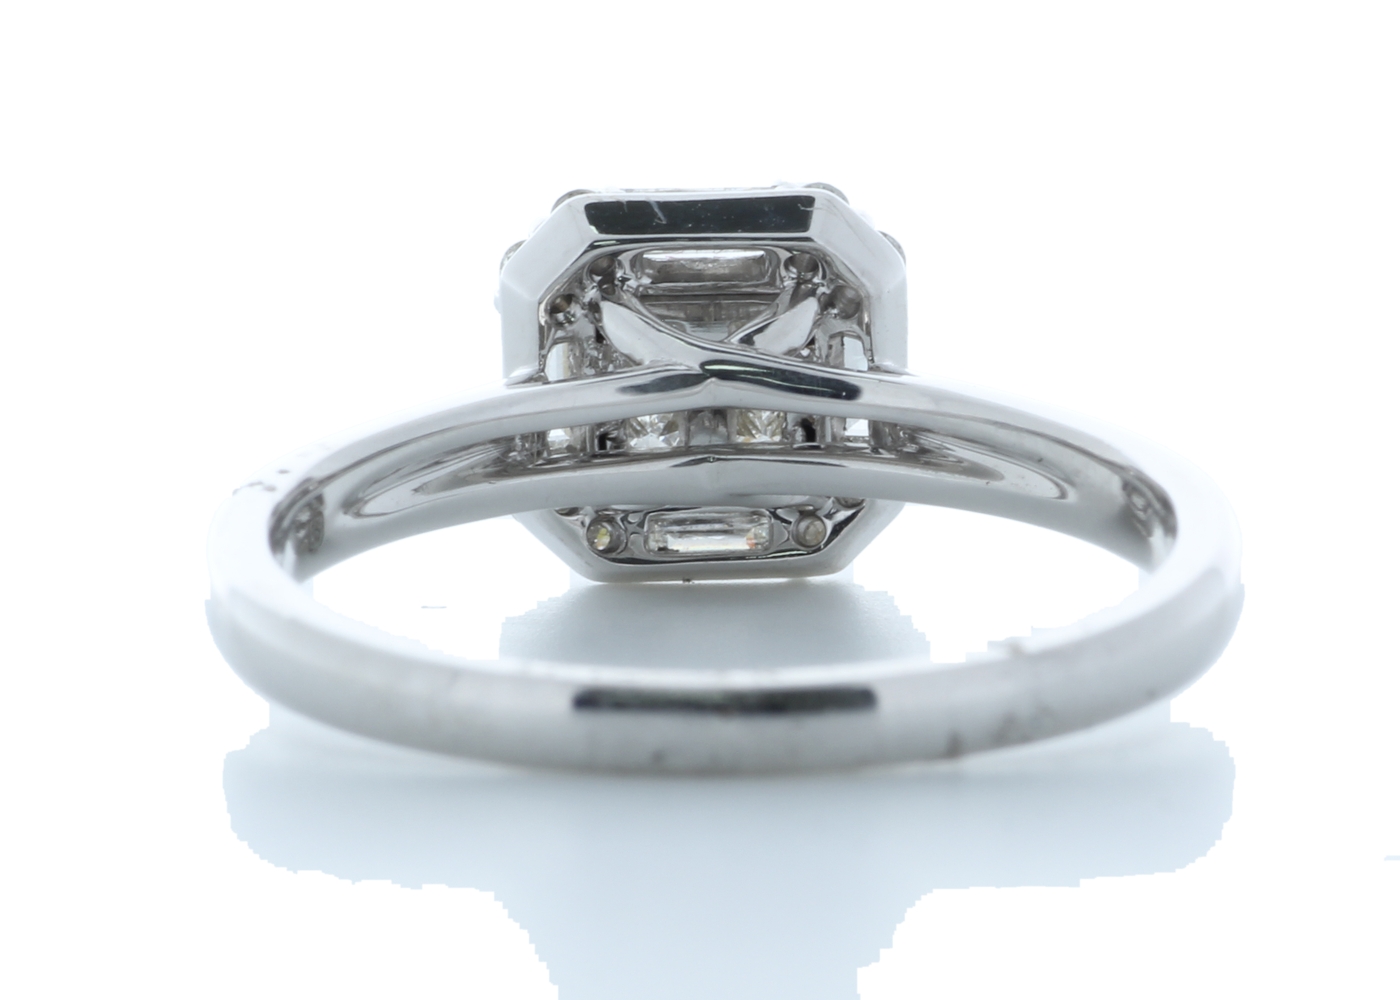 18ct White Gold Single Stone With Halo Setting Ring 0.55 Carats - Image 3 of 4